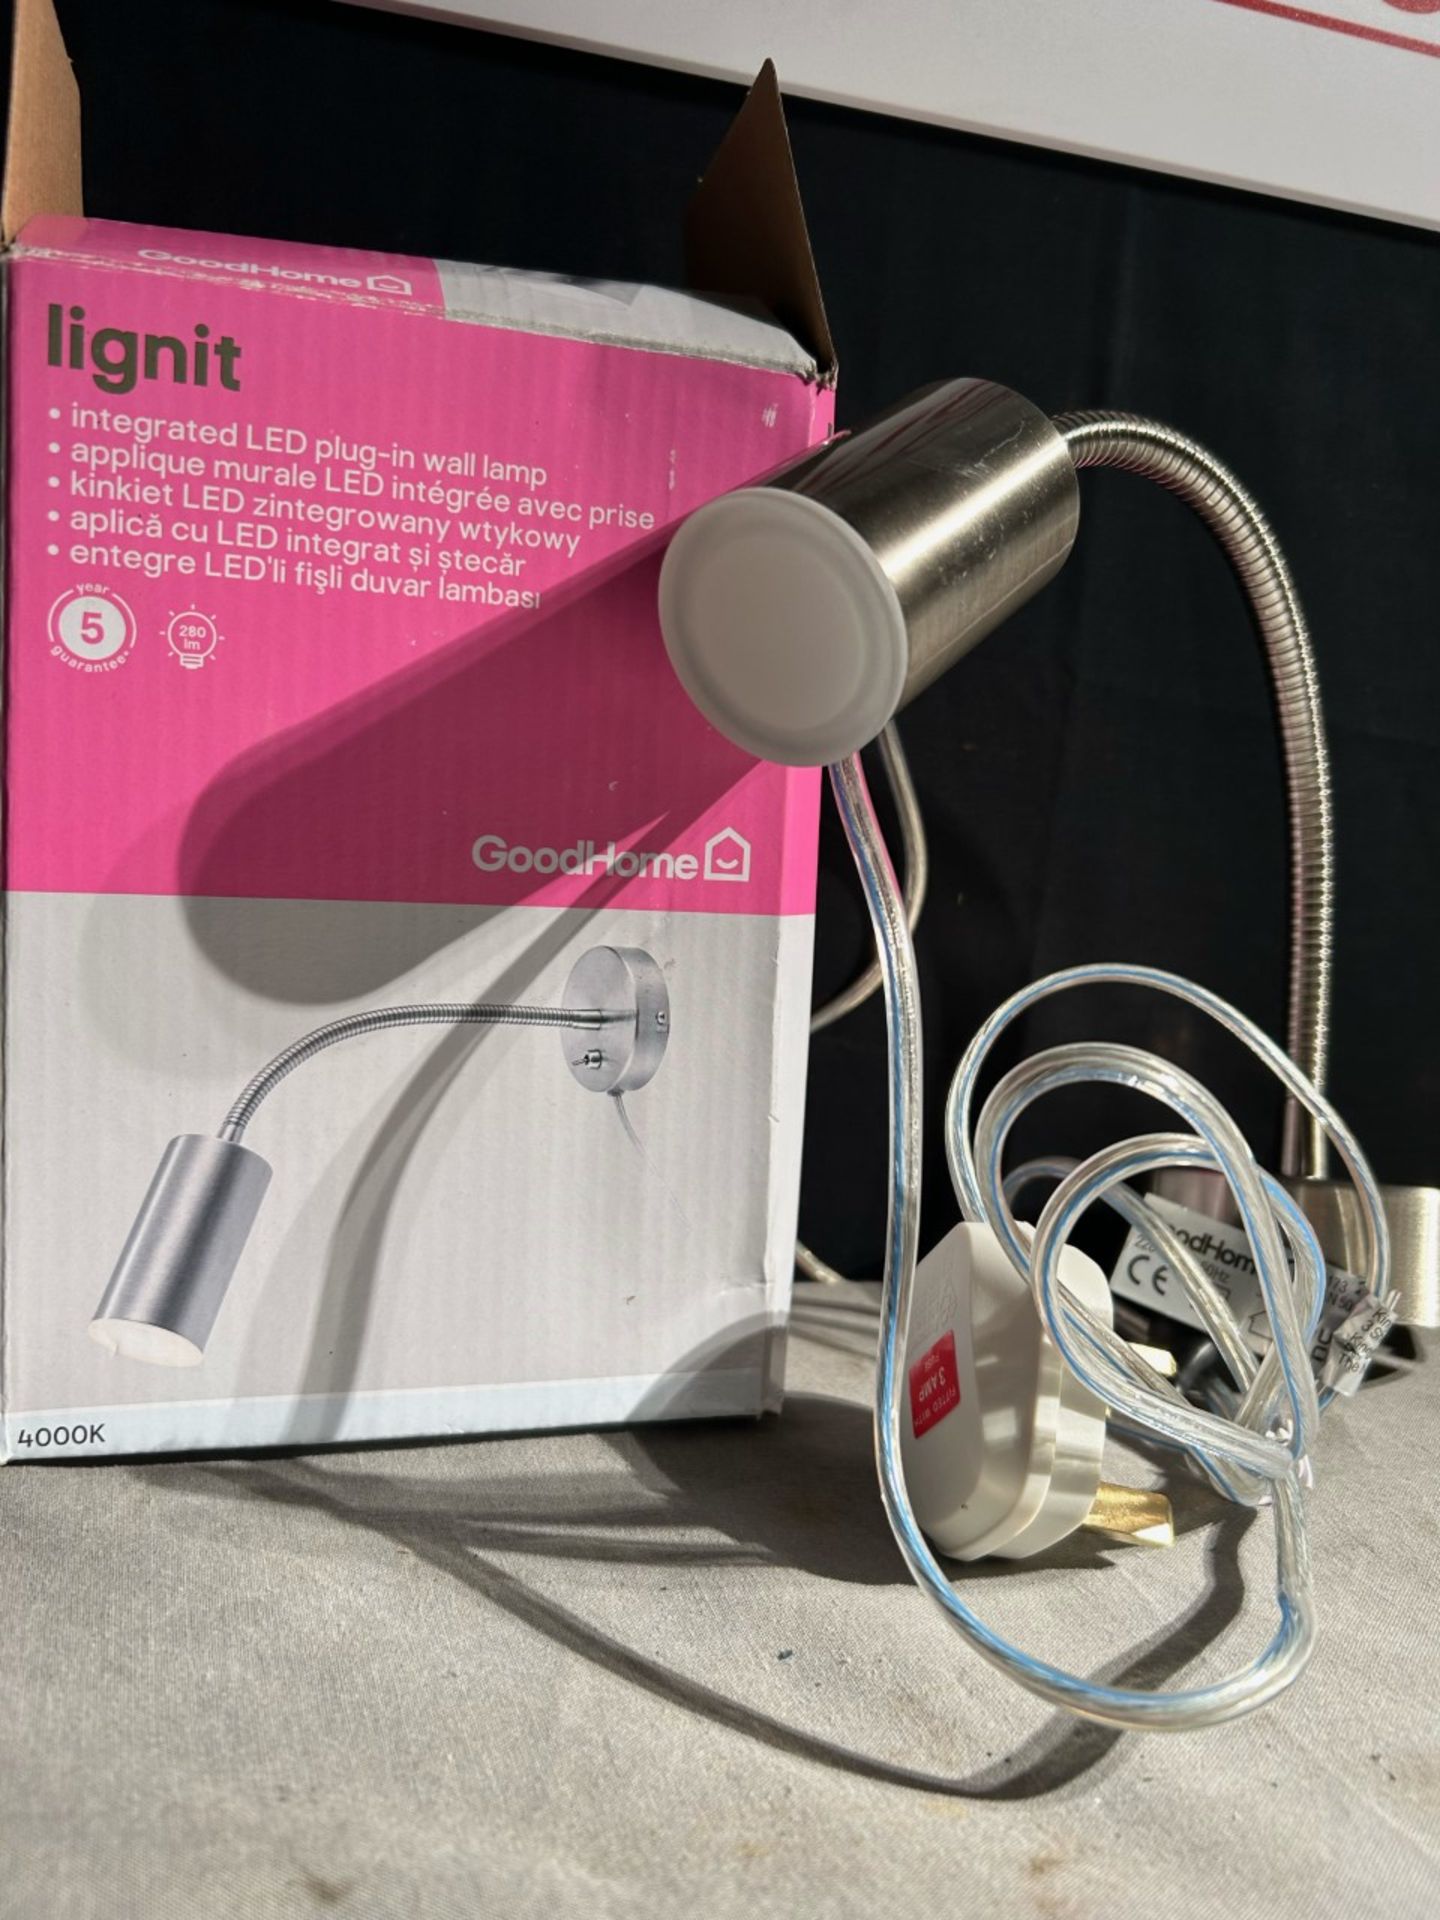 Intergrated plug in LED Flexible wall lamp. New in box - Image 3 of 3